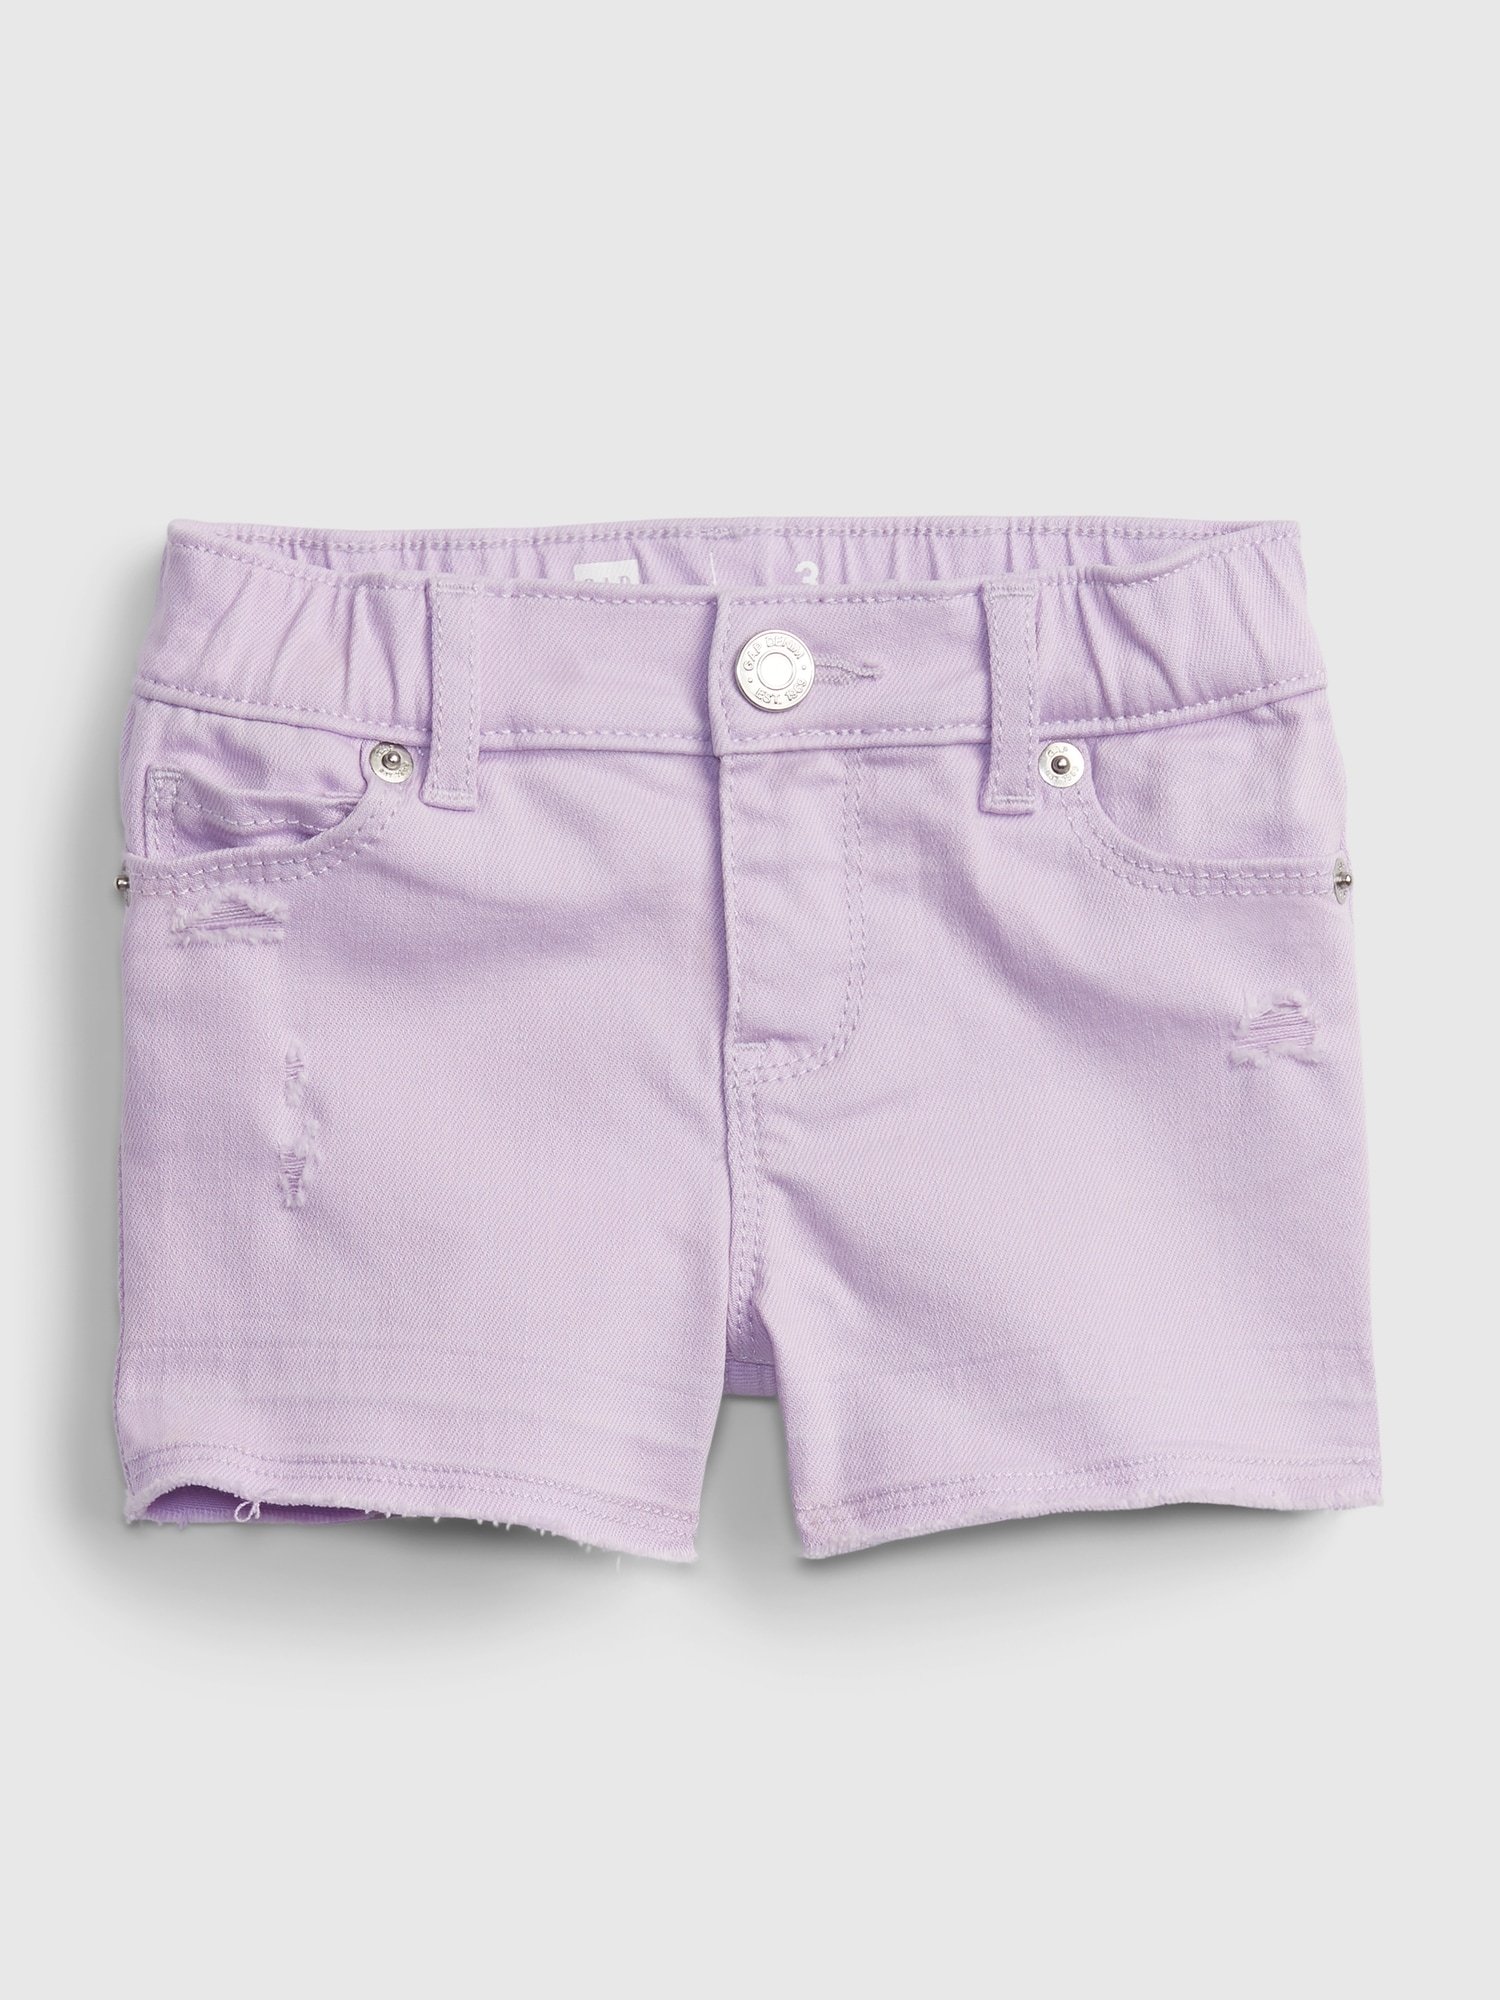 Jean Shorts product image